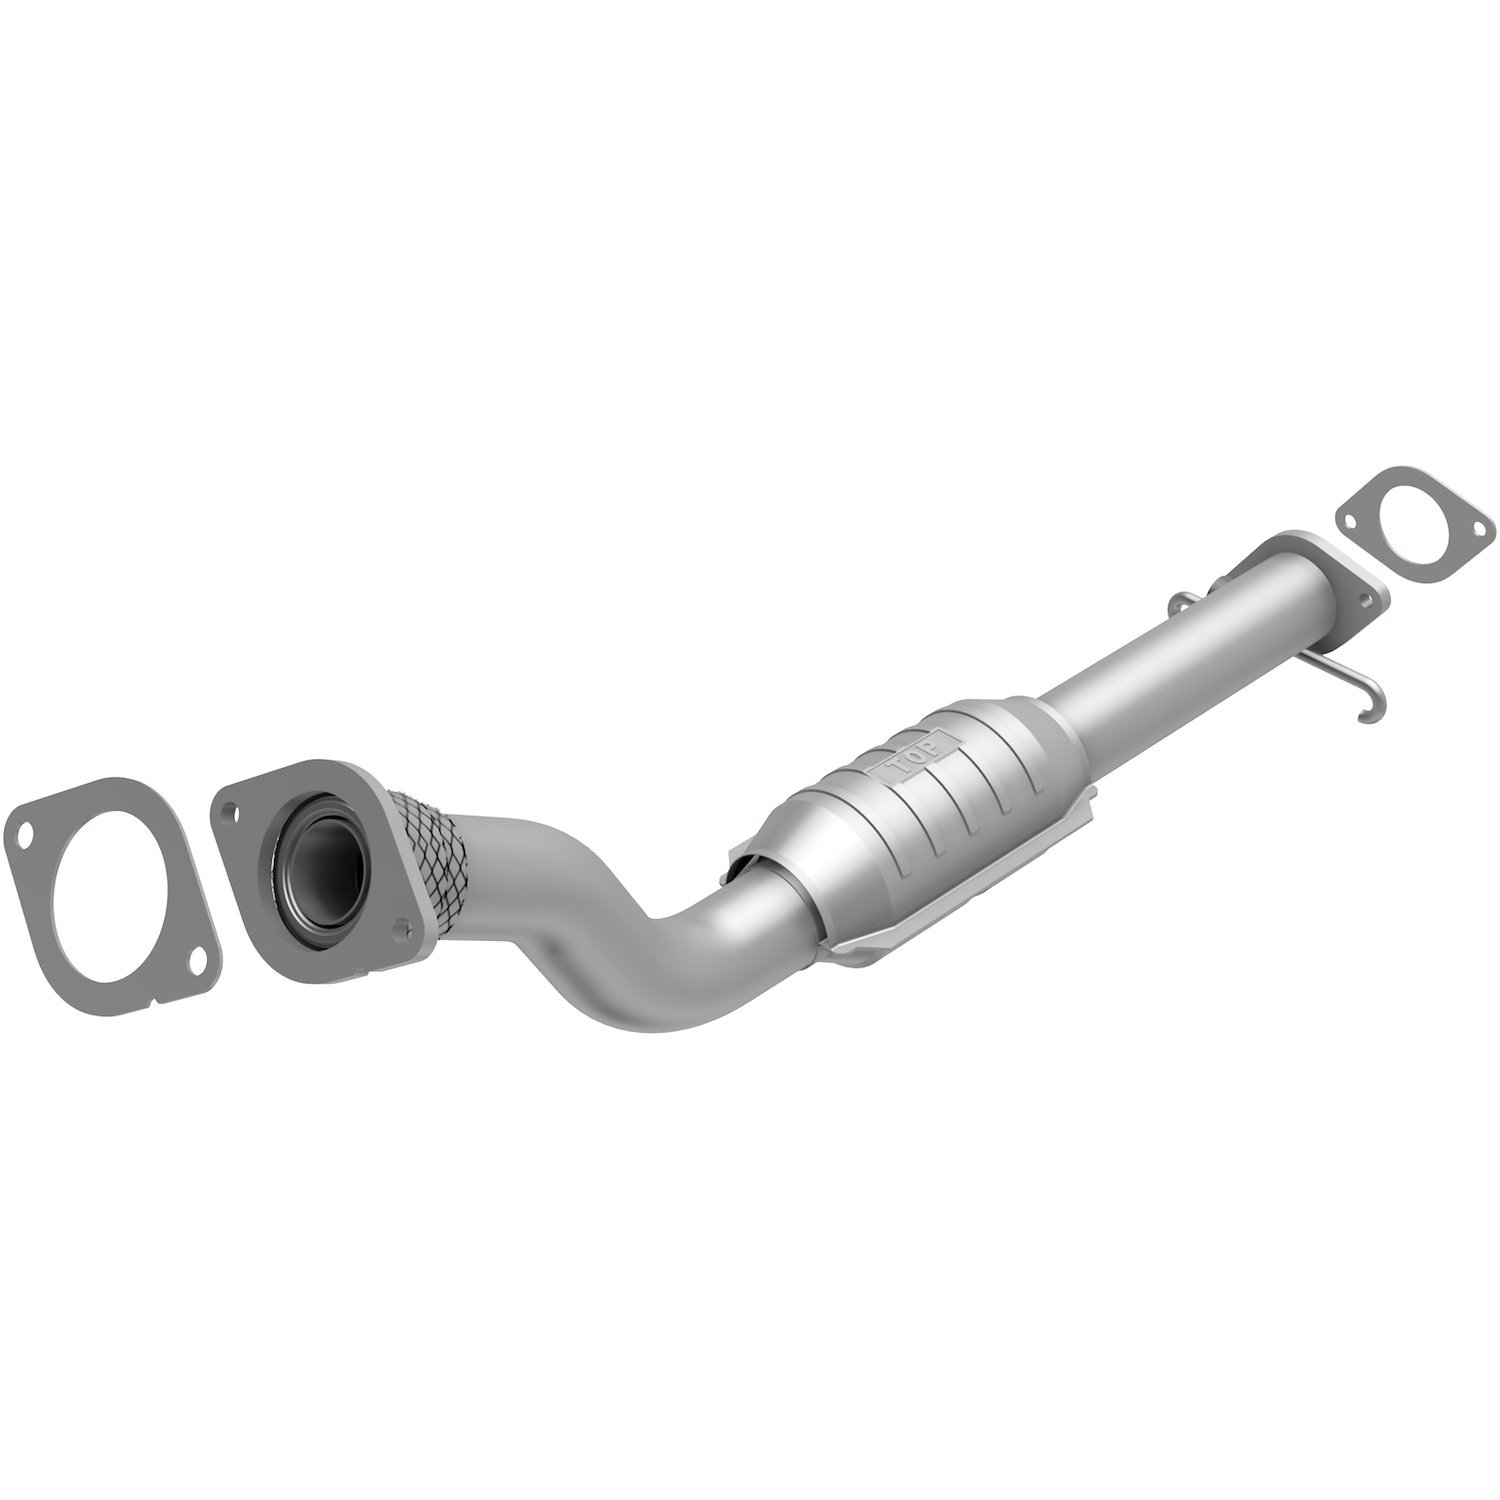 1999-2002 Oldsmobile Intrigue OEM Grade Federal / EPA Compliant Direct-Fit Catalytic Converter